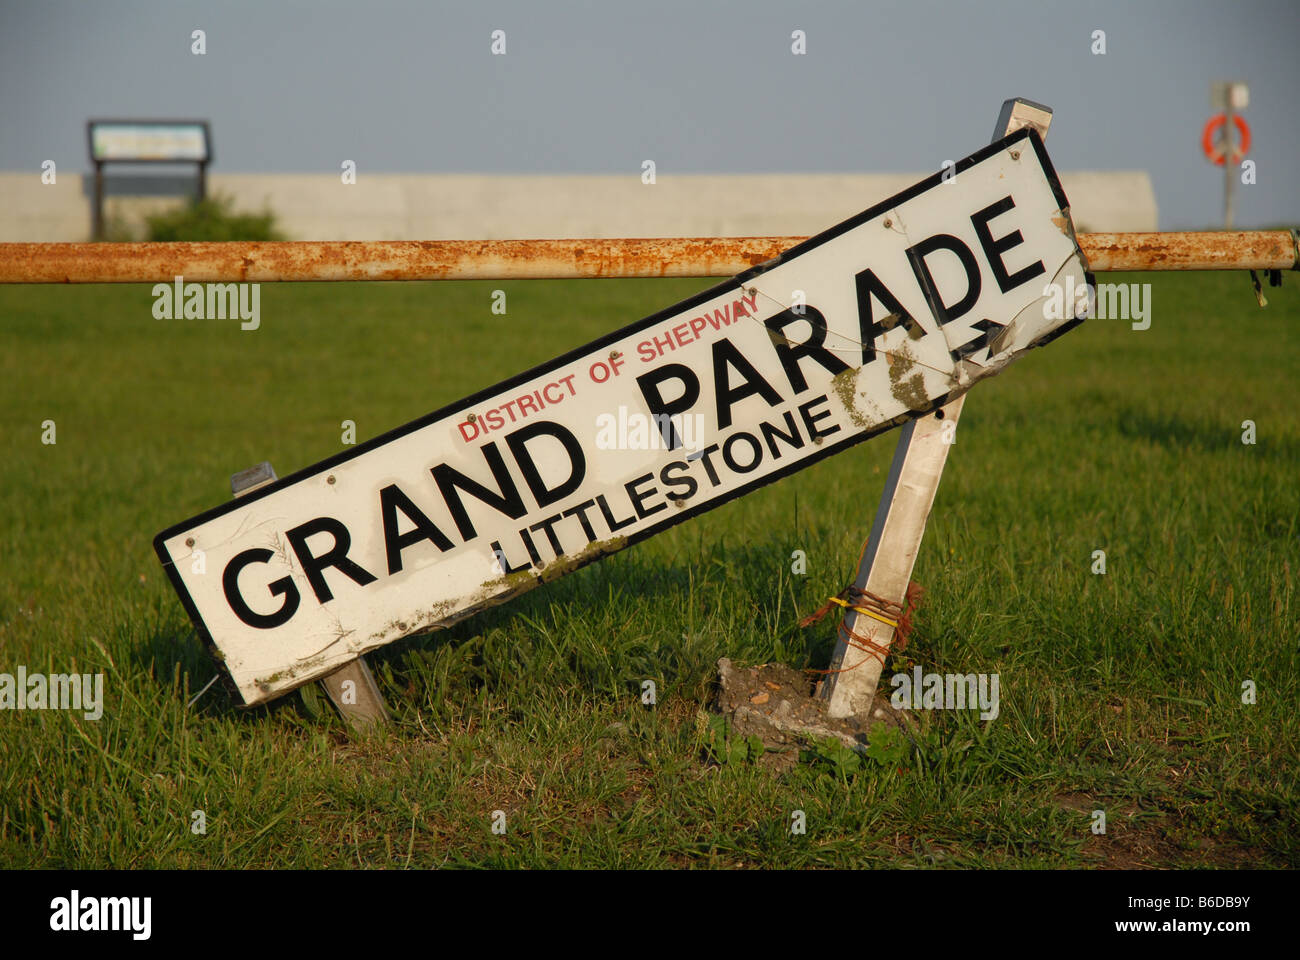 A street sign saying Grand Parade in disrepair Stock Photo